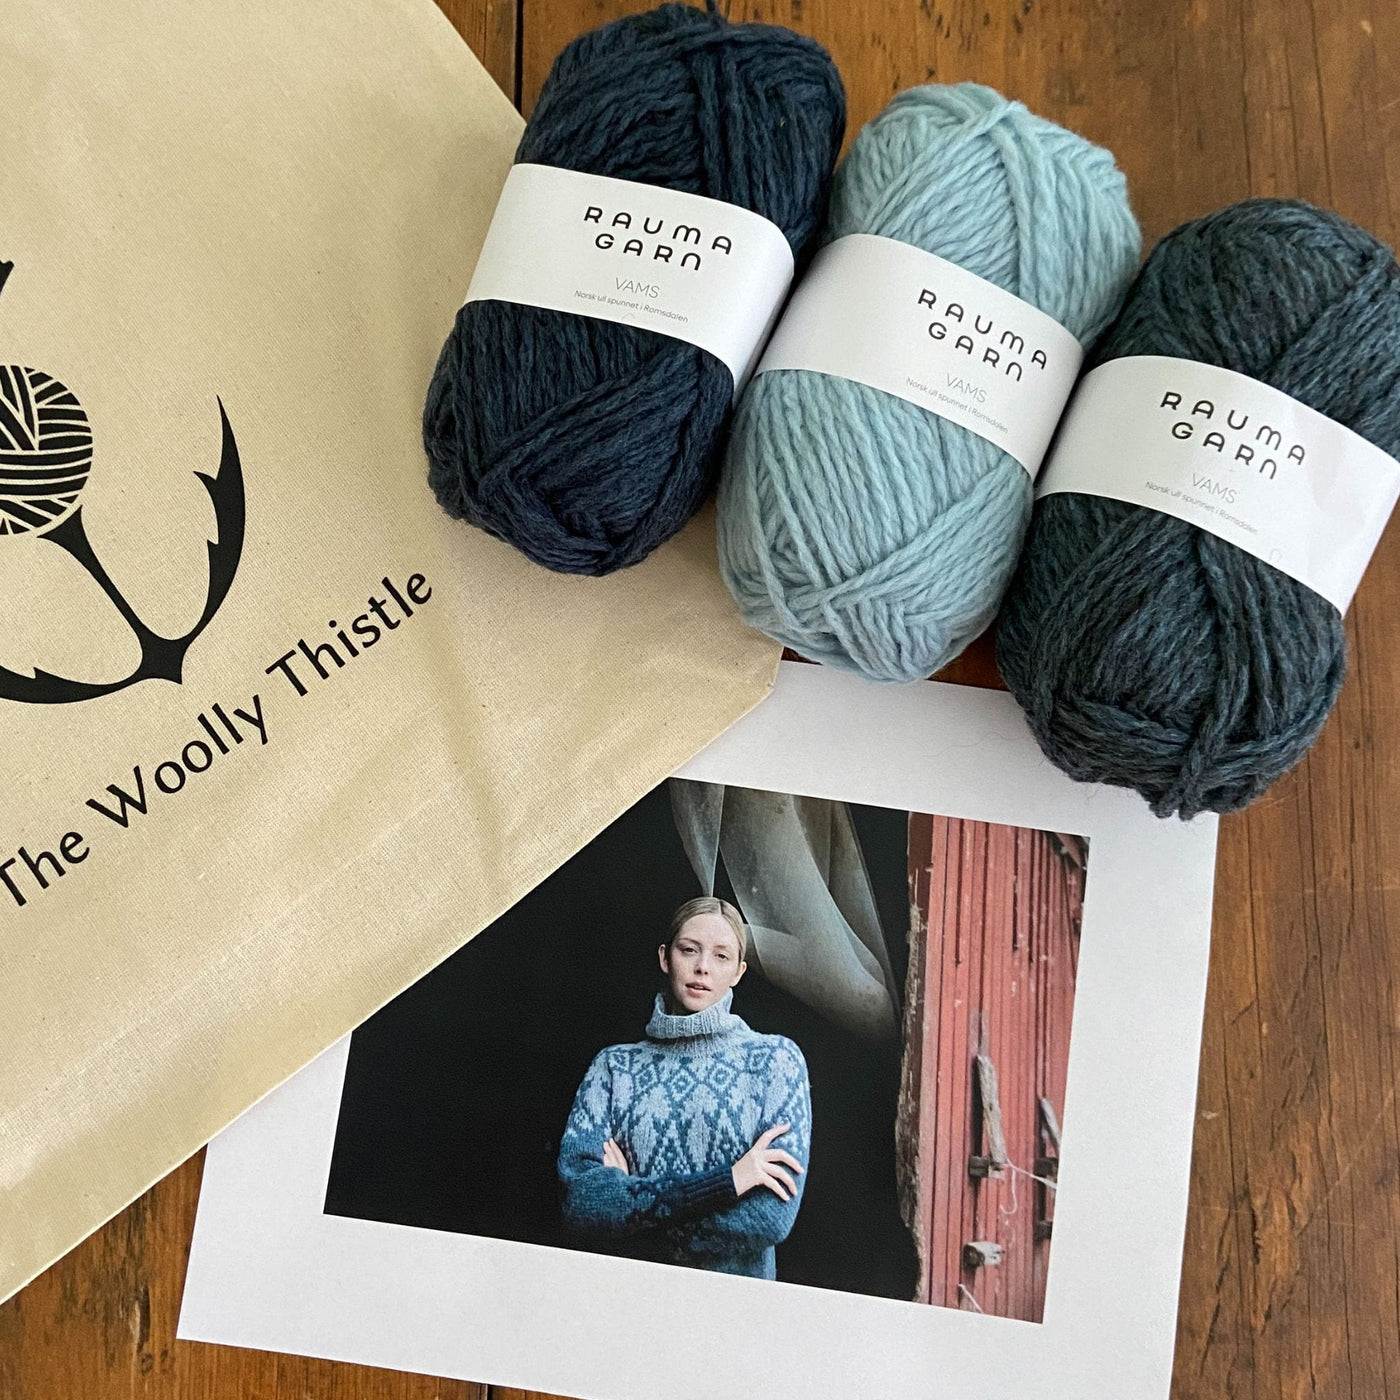 Components of the Iku Turso sweater yarn set knit with blue shades of Rauma Vams. This is a design from the Knitted Kalevala book by Jenna Kostet and published by Laine. Three shades of Rauma Vams yarn on table with photo of sweater and The Woolly Thistle Tote Bag. 